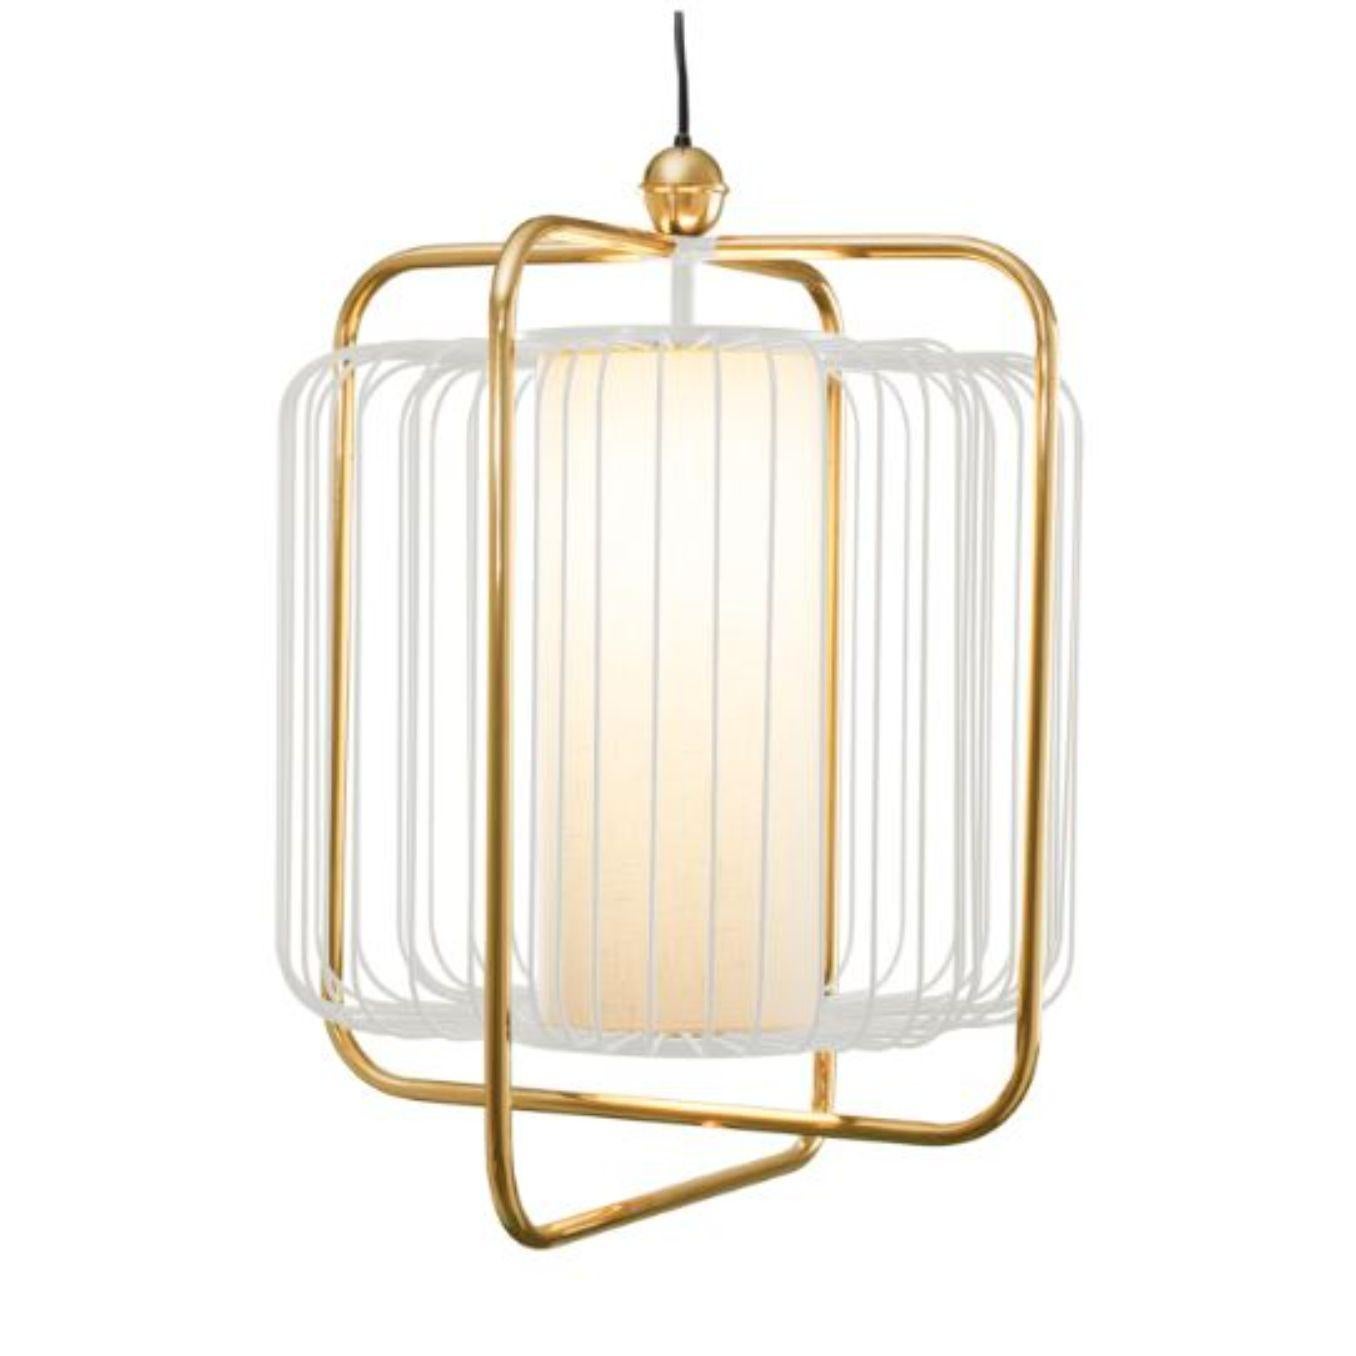 Brass and ivory Jules suspension lamp by Dooq
Dimensions: W 73 x D 73 x H 72 cm
Materials: lacquered metal, polished or brushed metal, brass.
abat-jour: cotton
Also available in different colors and materials.